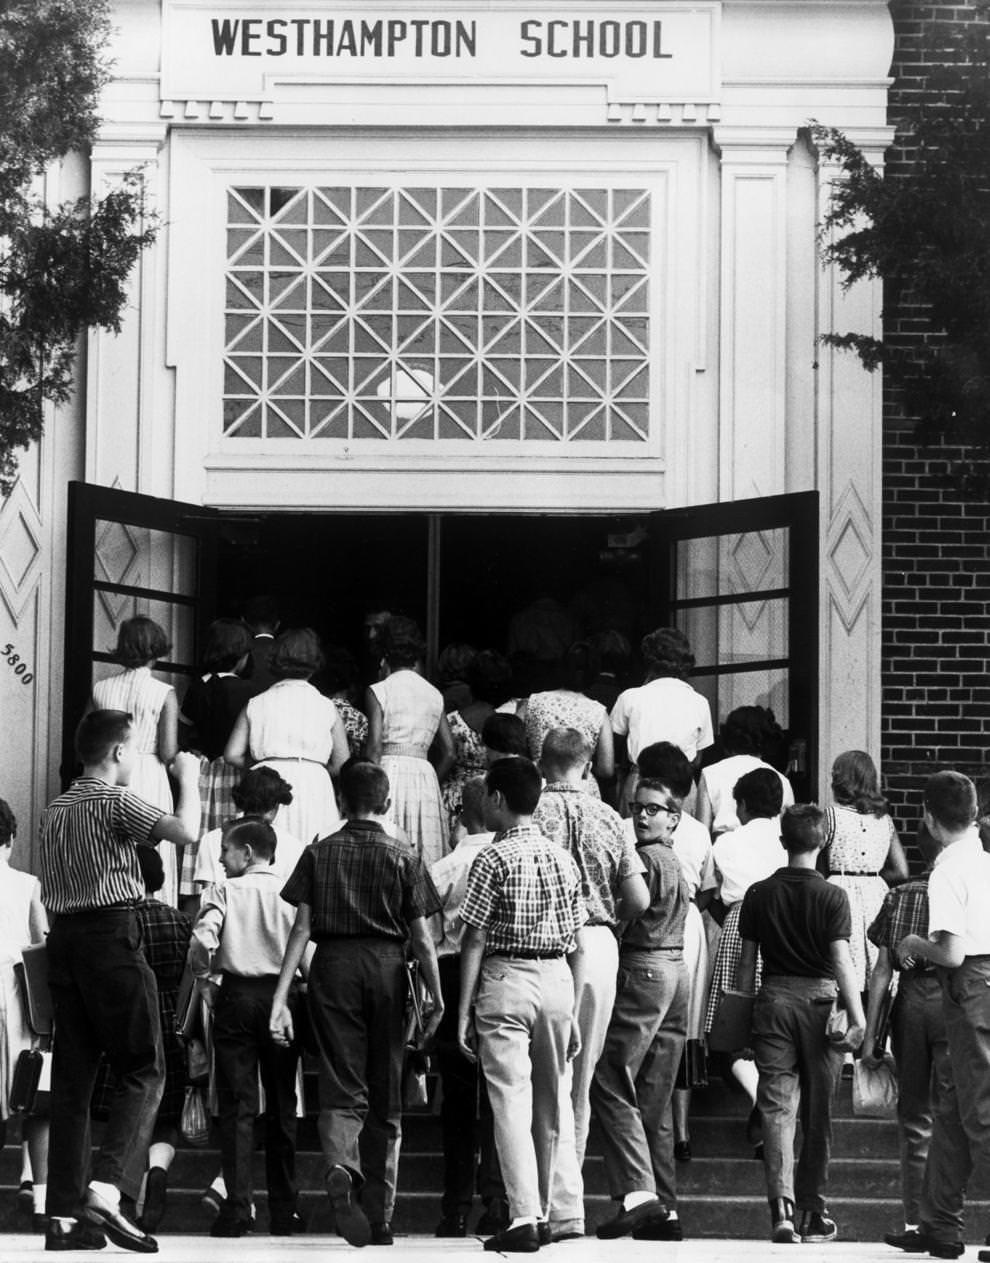 Students entered Westhampton School in Richmond, 1961.